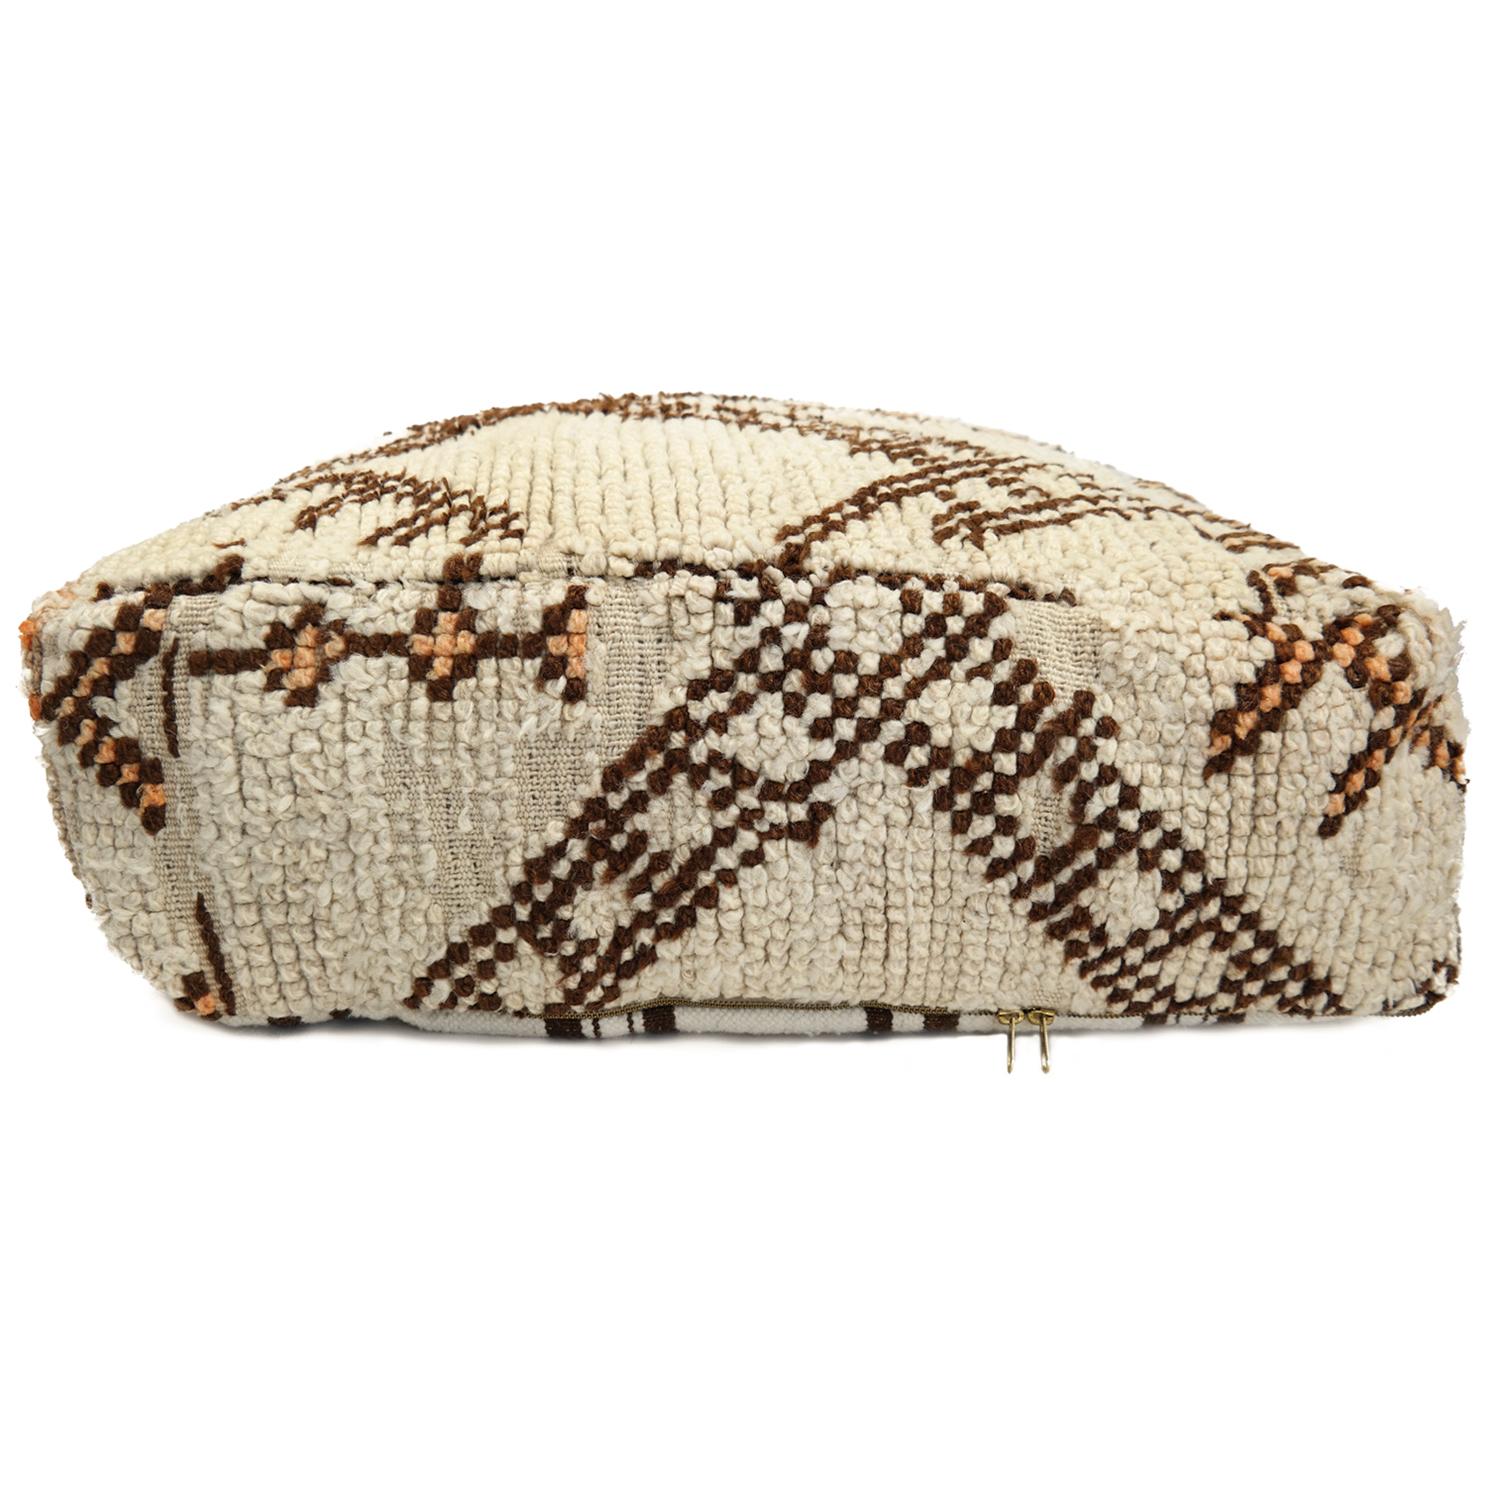 Hand-Knotted Pouf from Morocco Natural Floor Cushion Moroccan Ottoman For Sale